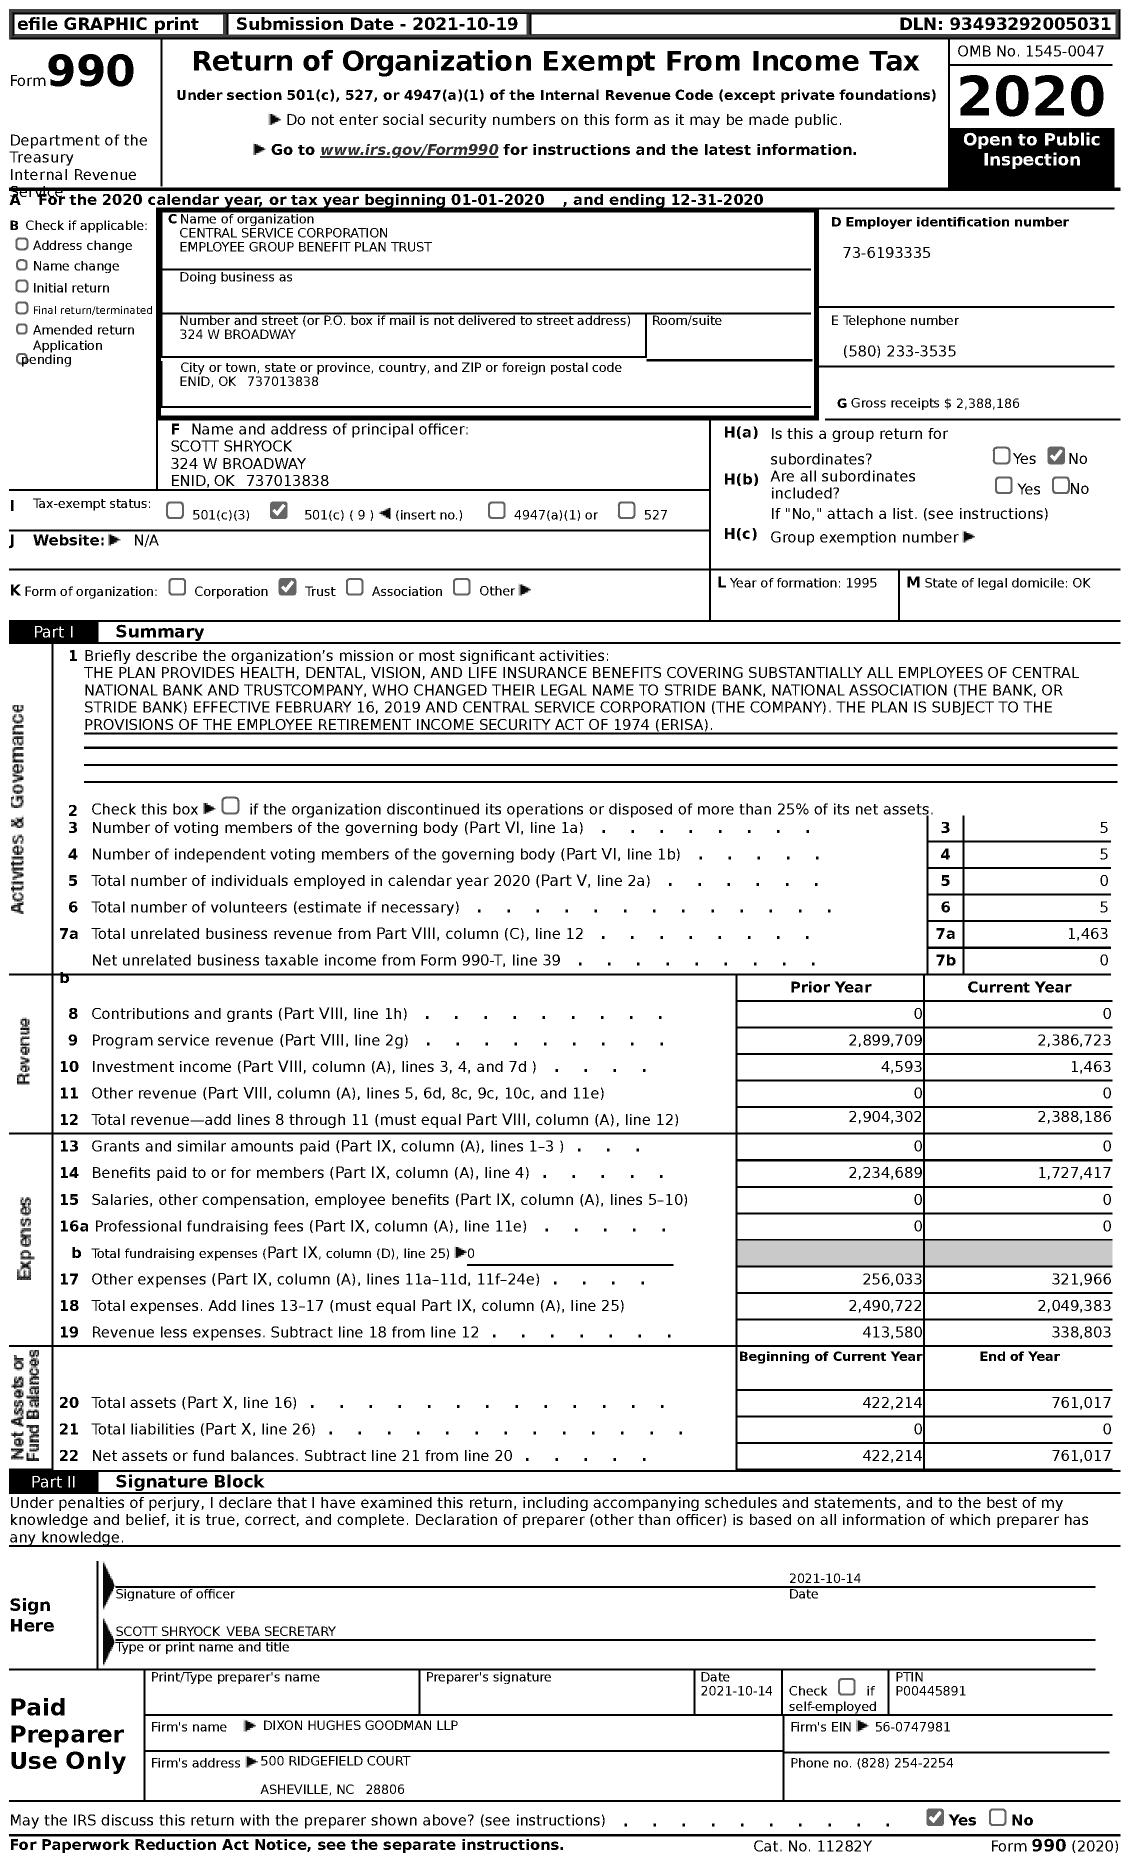 Image of first page of 2020 Form 990 for Central Service Corporation Employee Group Benefit Plan Trust